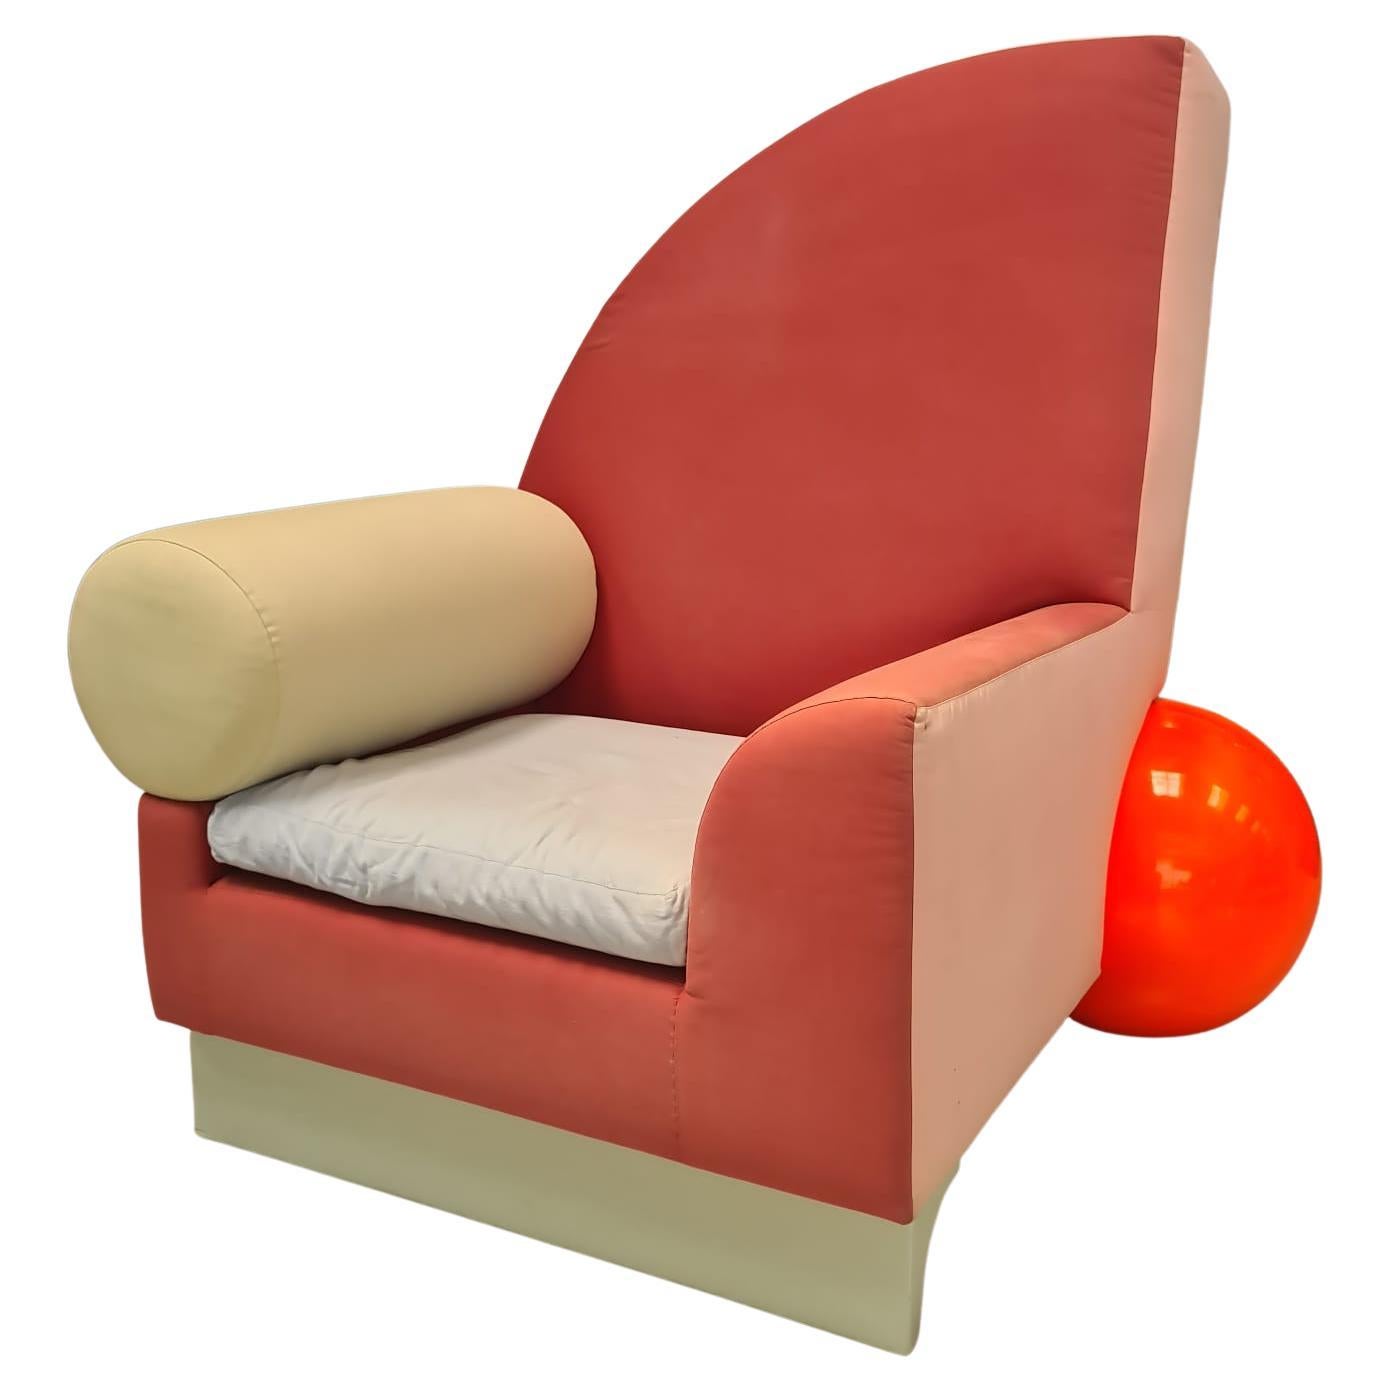 Bel Air Armchair by Peter Shire, Memphis Milano